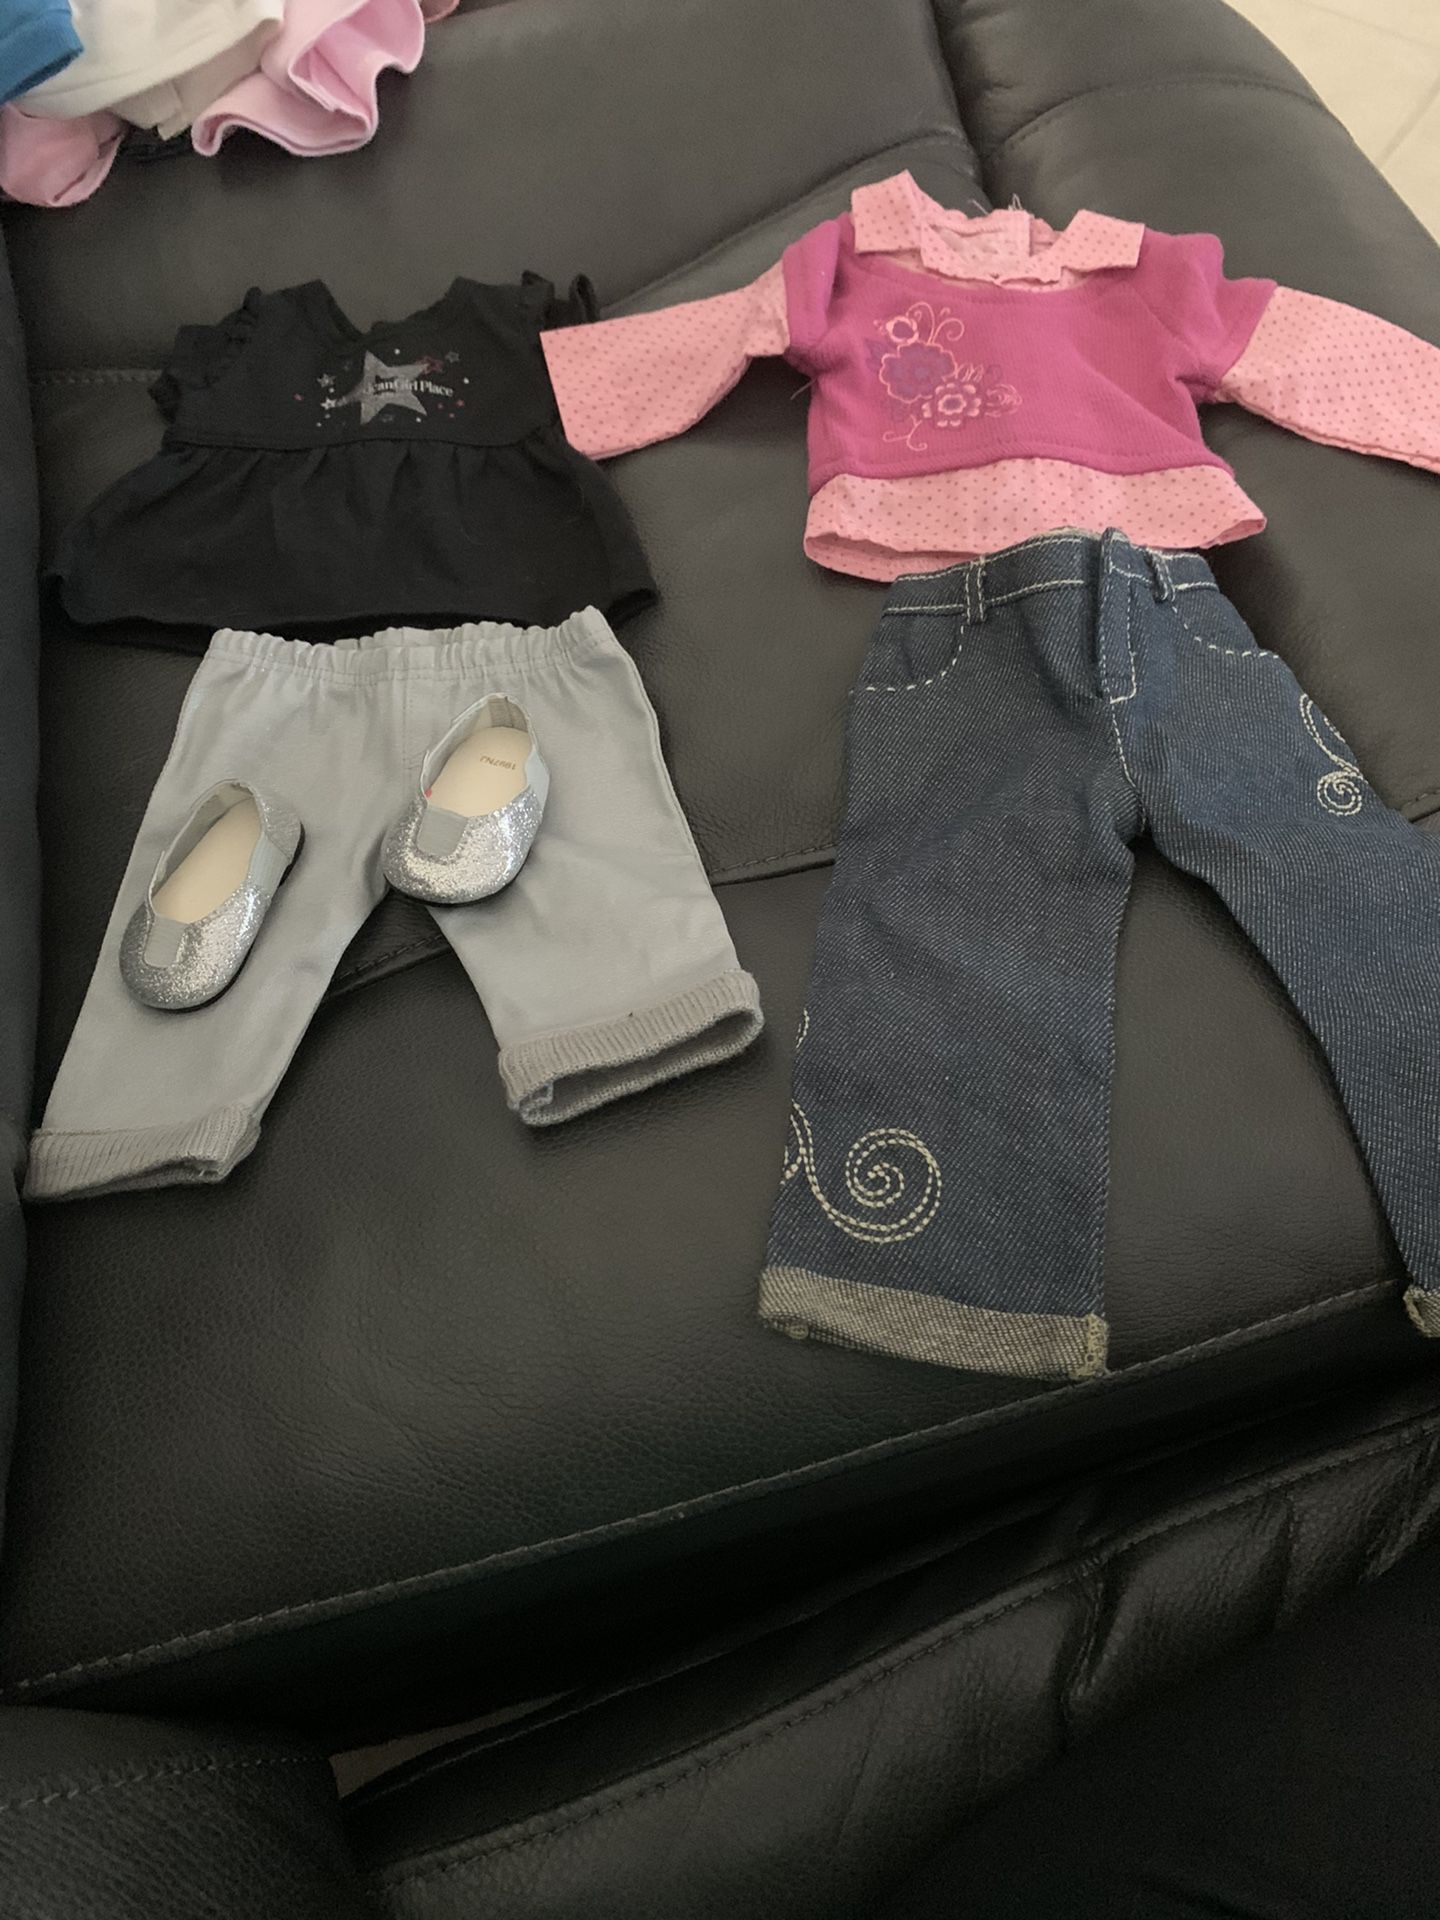 American girl doll outfits